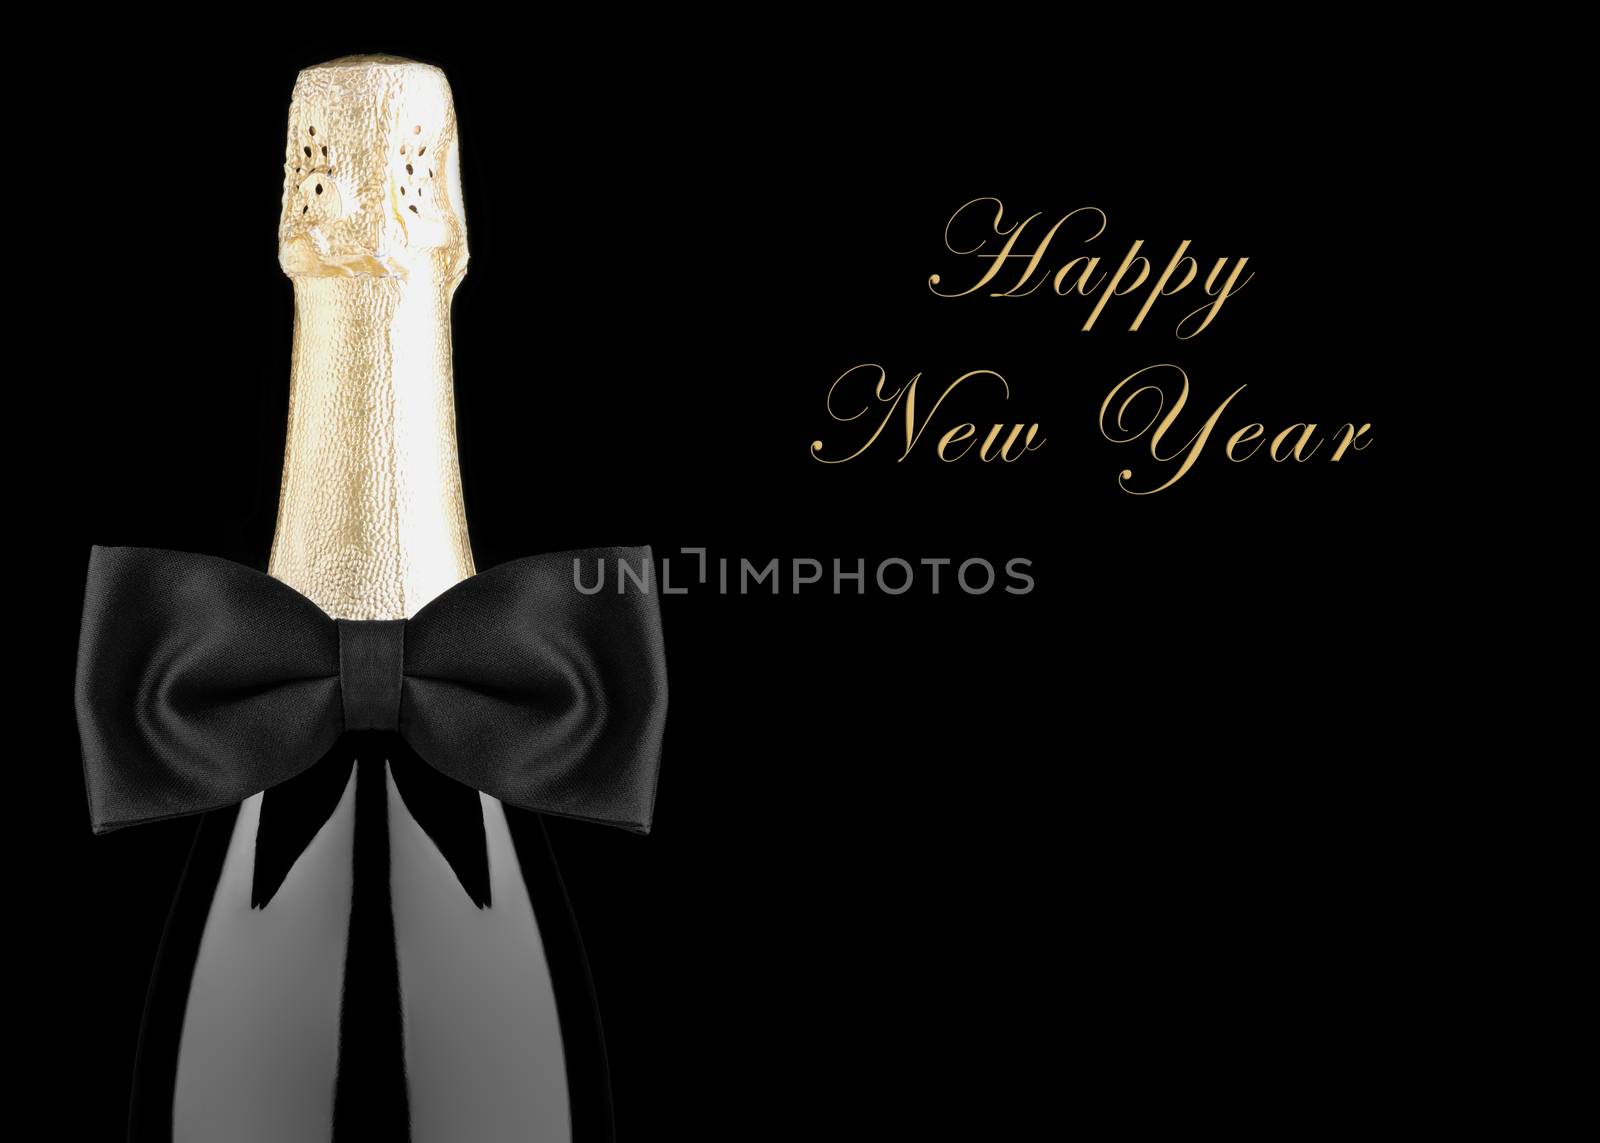 Happy New Year Champagne Bottle with Bow Tie by sCukrov